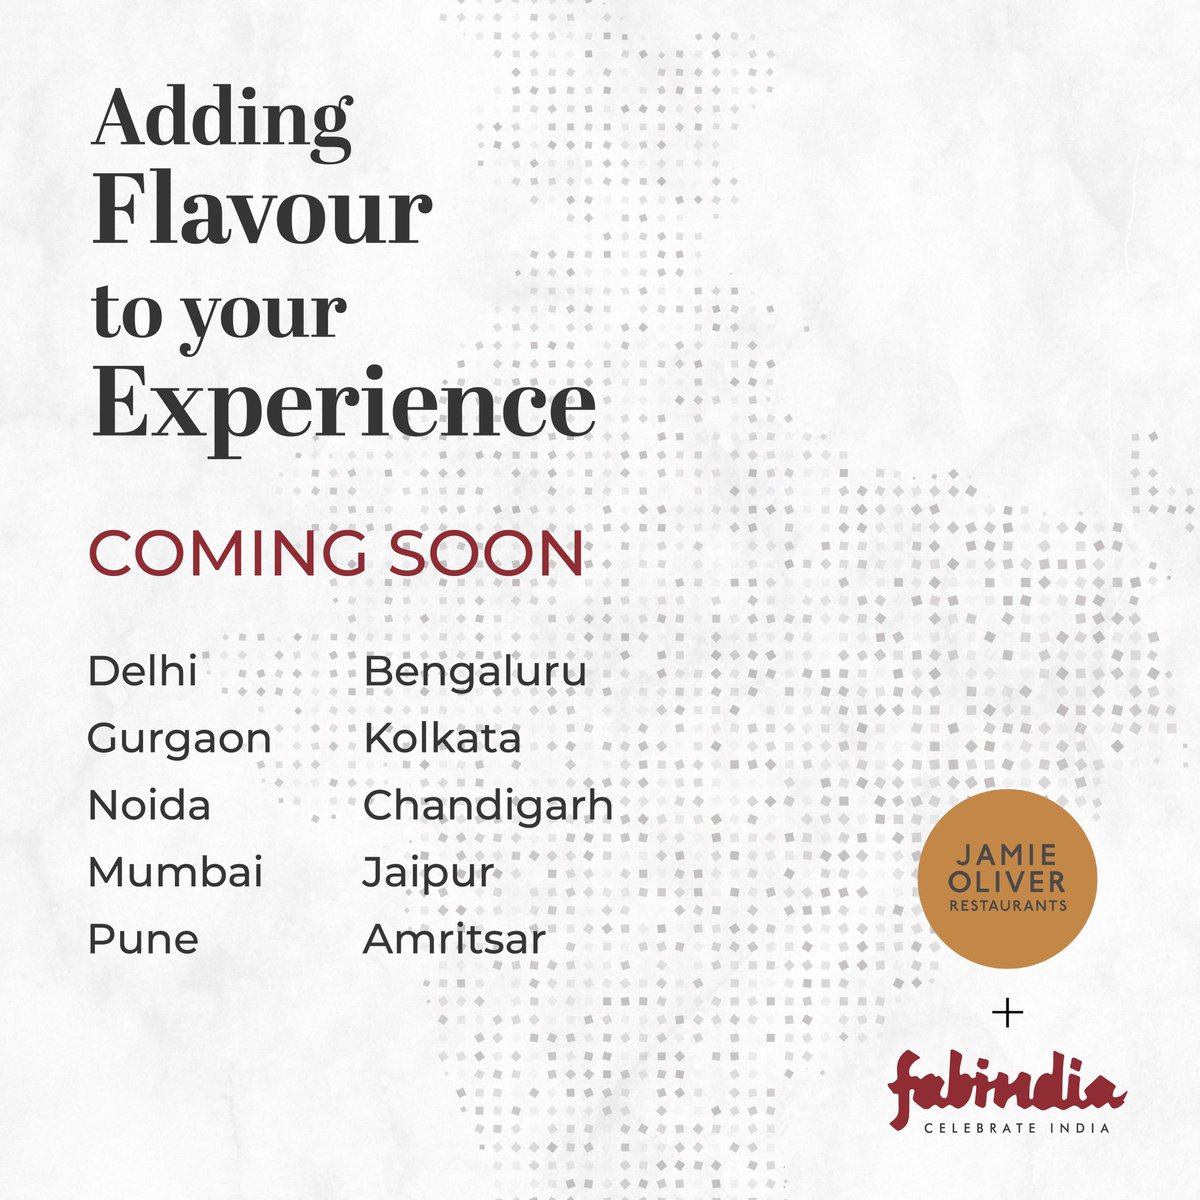 NEWS SERVED HOT! Fabindia EXPERIENCE CENTRES across India will host cafes by Jamie Oliver as he shares our values of Indian culinary traditions with simple, delicious food made from scratch with fresh ingredients. Stay connected for more. #JamieOliver #Fabindia #DeliciousFood